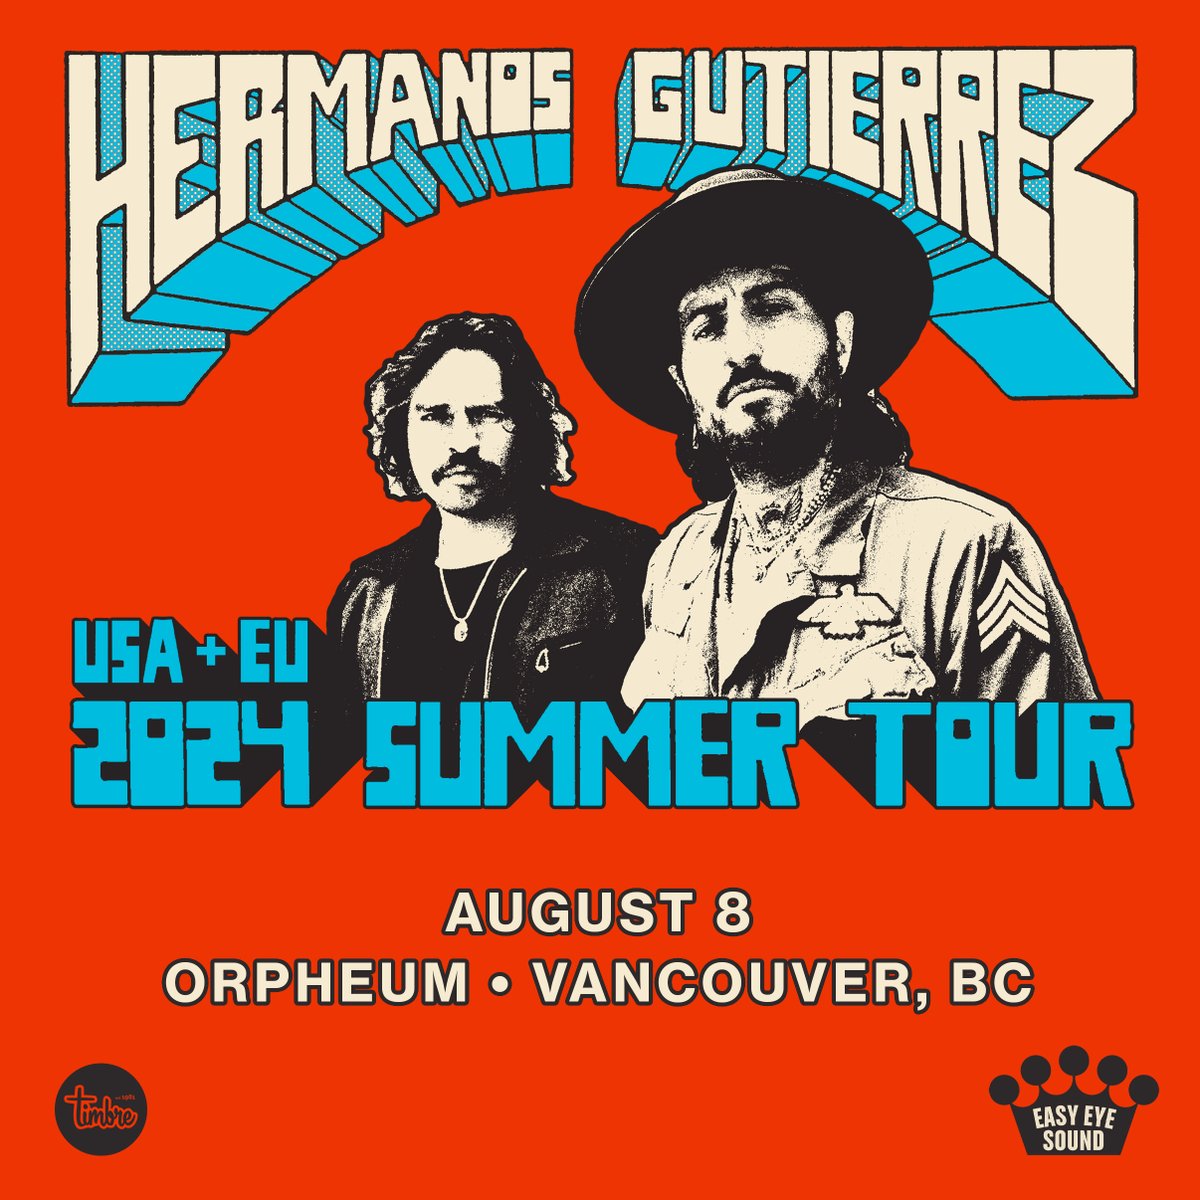 ON SALE NOW! @HermanosGMusic Aug 8 @ Orpheum Vancouver - Tickets: ticketmaster.ca/event/11006085…